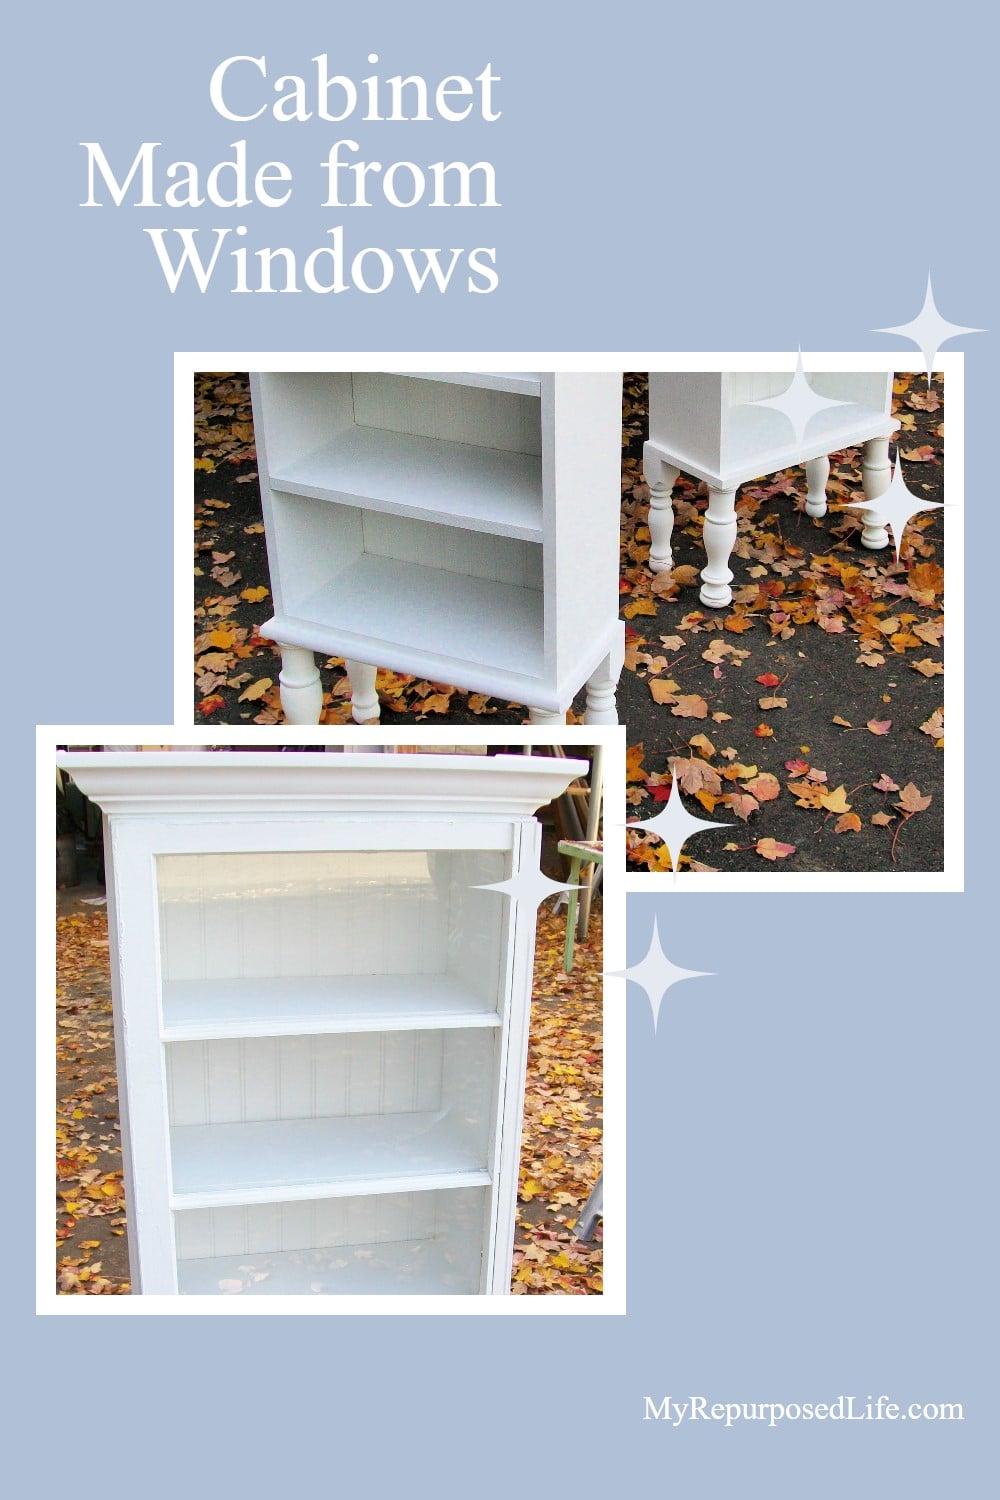 How to make repurposed window cabinets -- step by step directions on how to build the cabinet, put legs on it and use windows for doors. #MyRepurposedLife #Repurposed #windows #cabinets via @repurposedlife